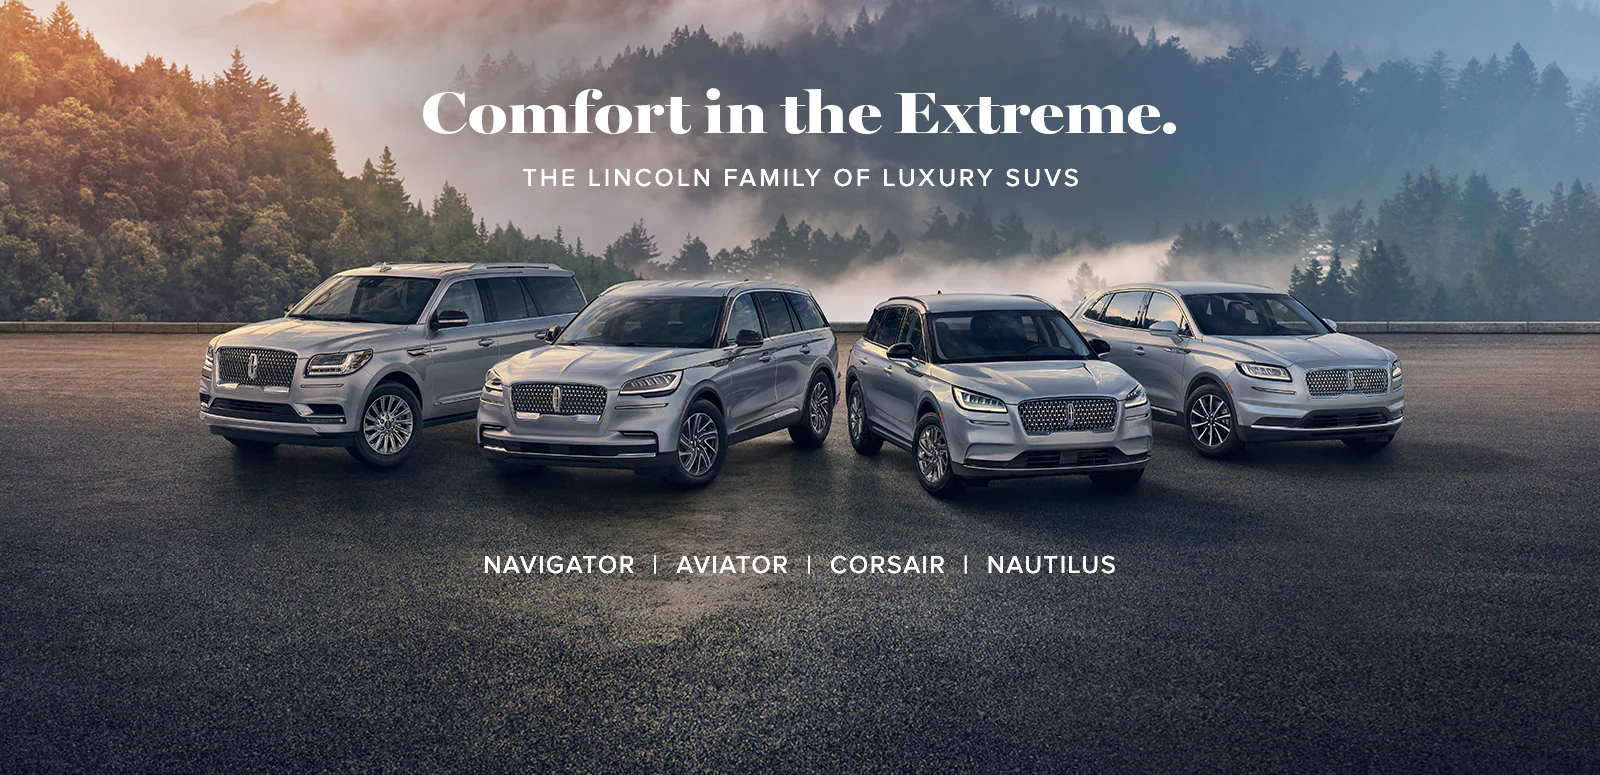 Shop All Lincoln Models at Paducah Lincoln in KY